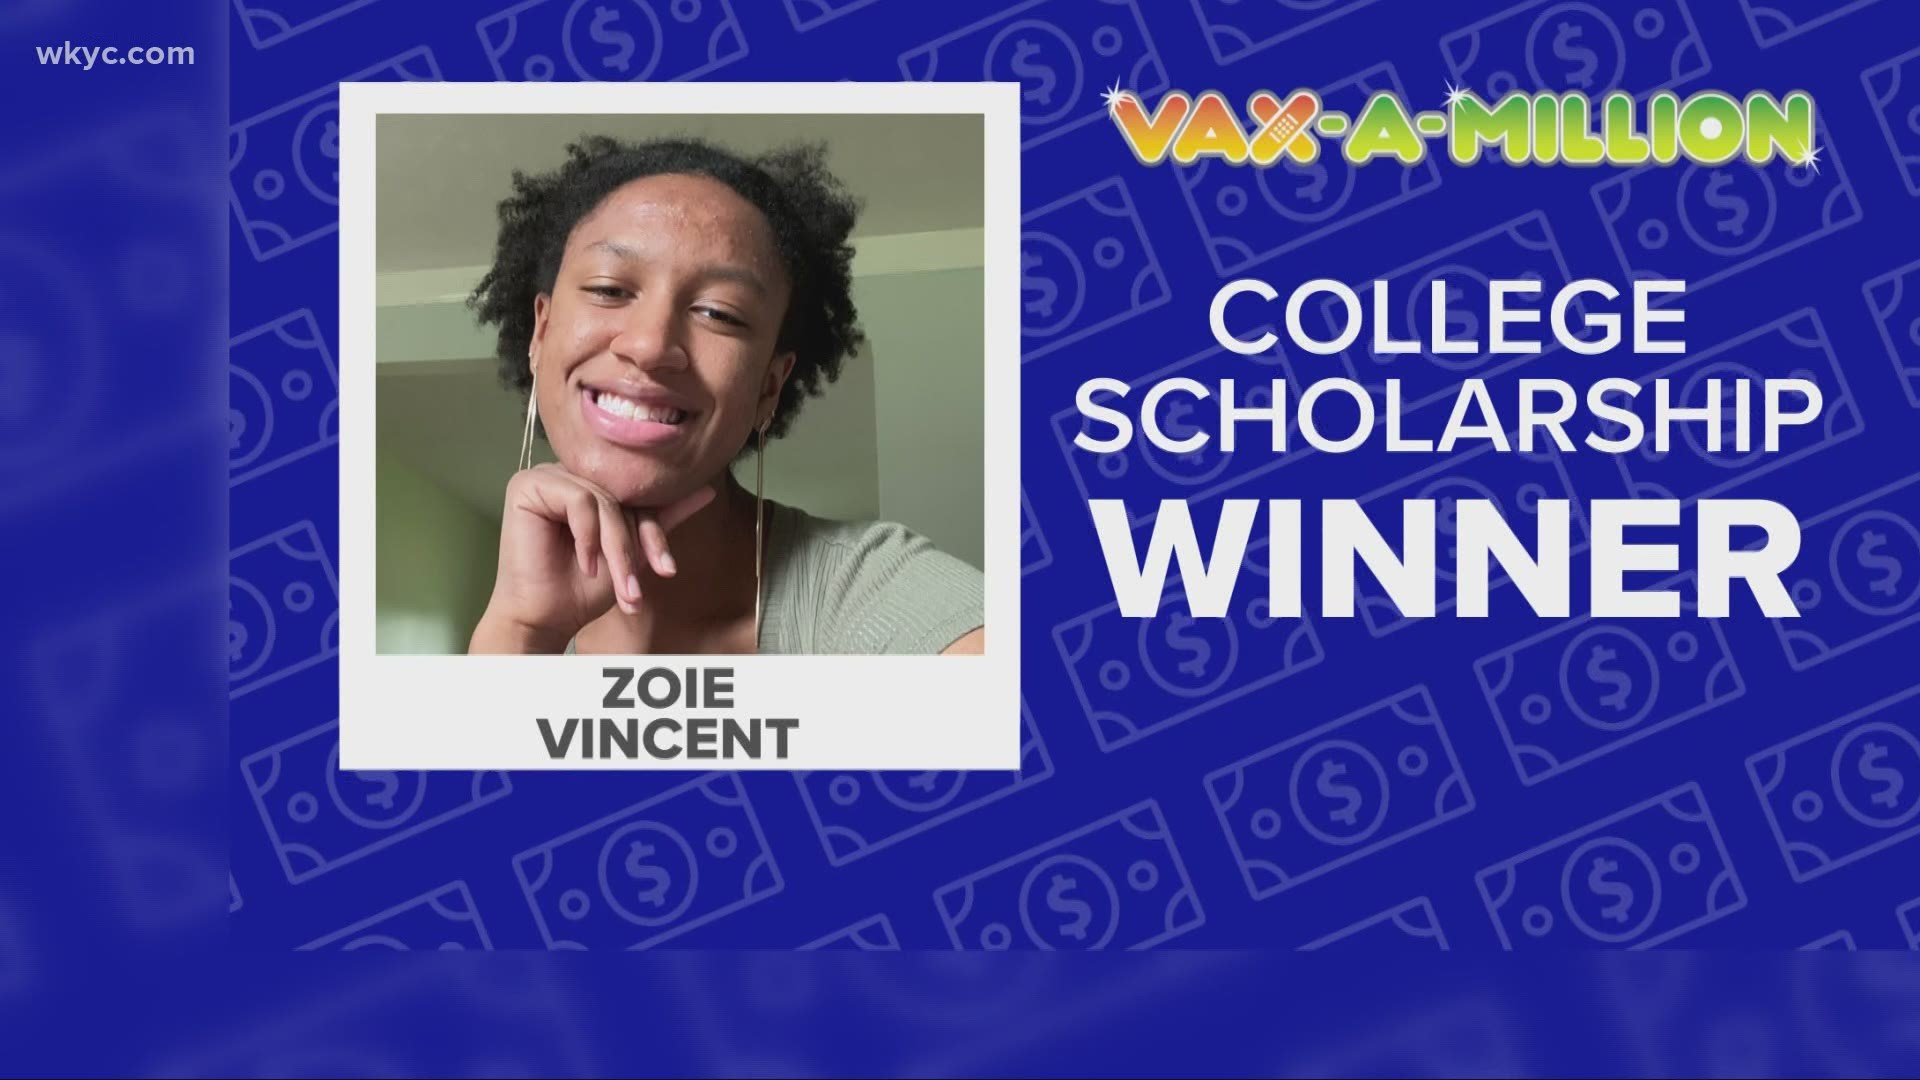 Johnathan Carlyle of Toledo was announced as the second winner of the $1 million prize. Zoie Vincent of Mayfield won the 'Vax-a-Million' scholarship.